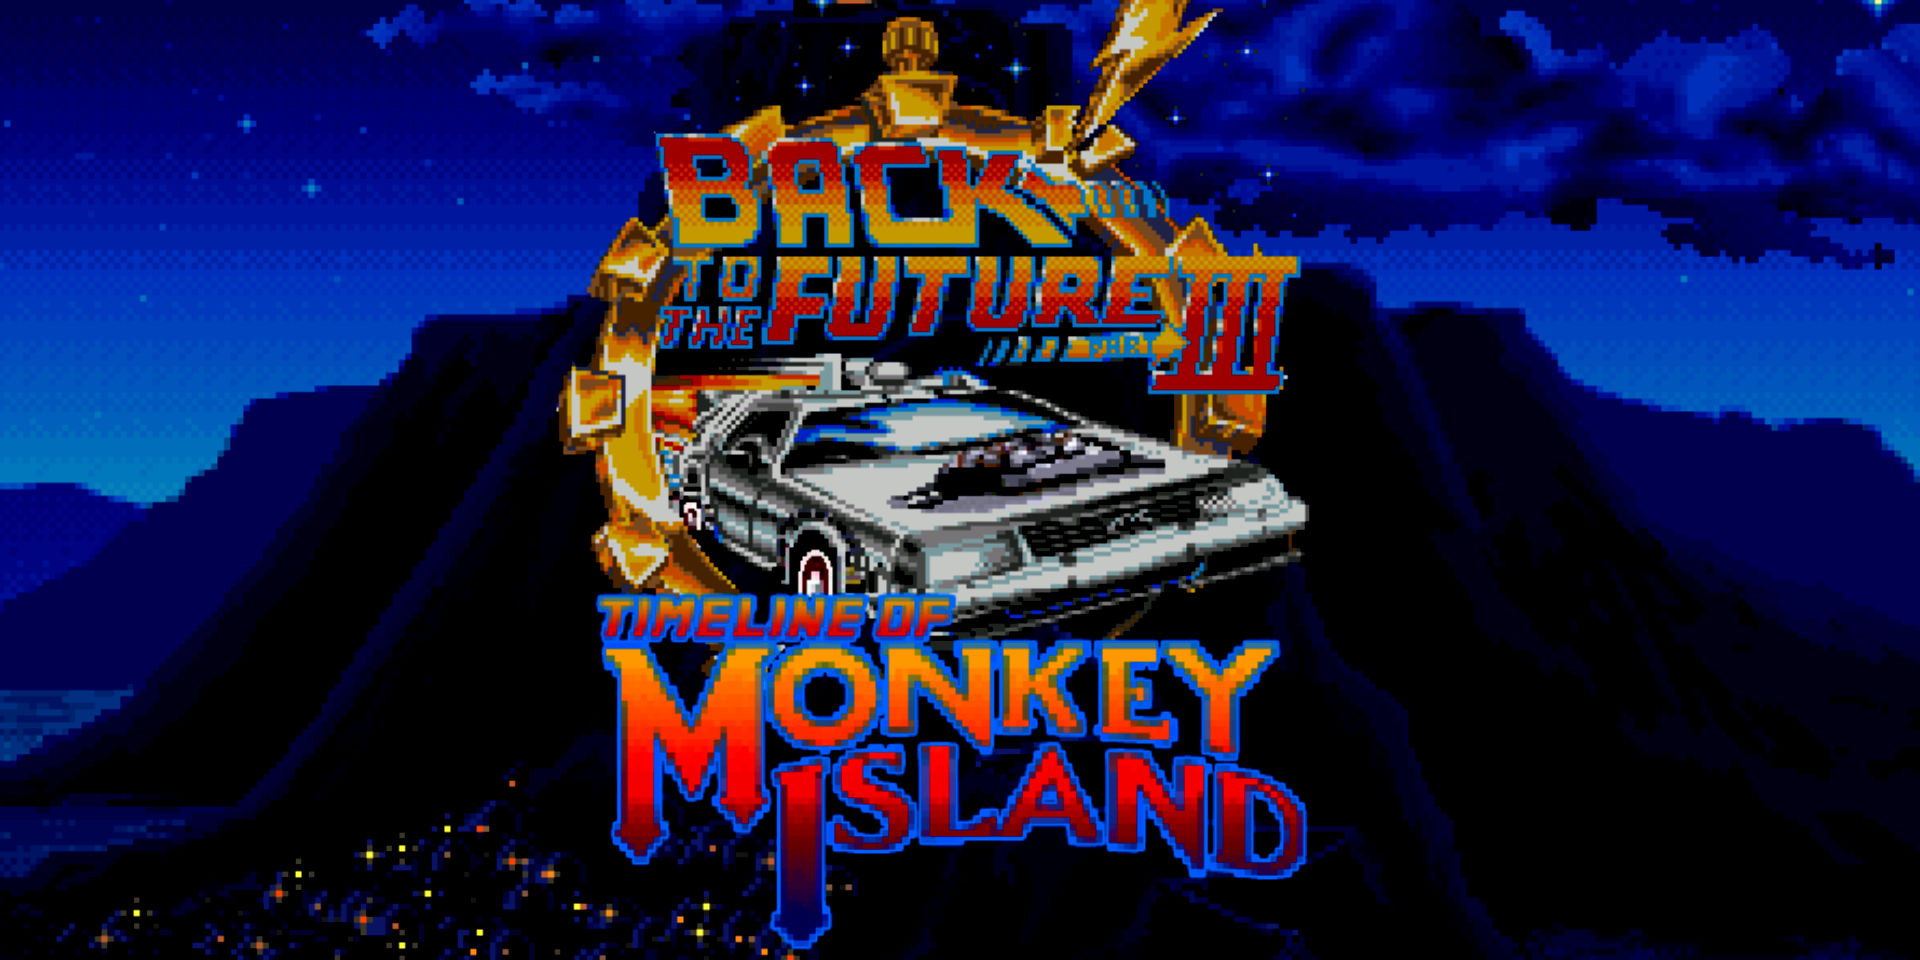 Back to the Future Part III: Timeline of Monkey Island